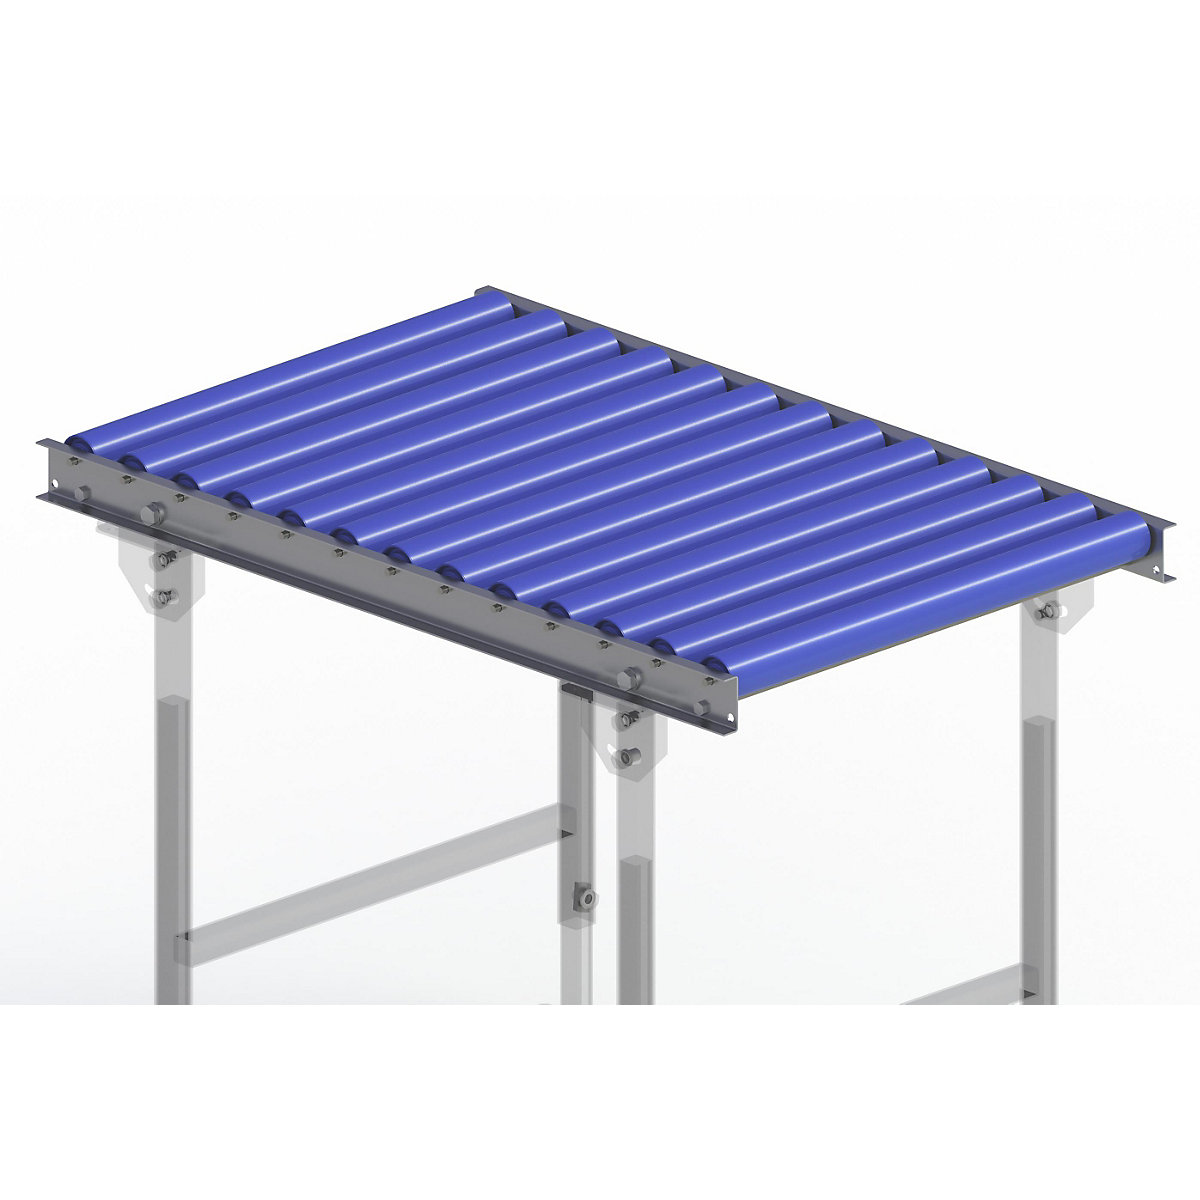 Gura – Light duty roller conveyor, steel frame with plastic rollers, track width 600 mm, axle spacing 75 mm, length 1 m